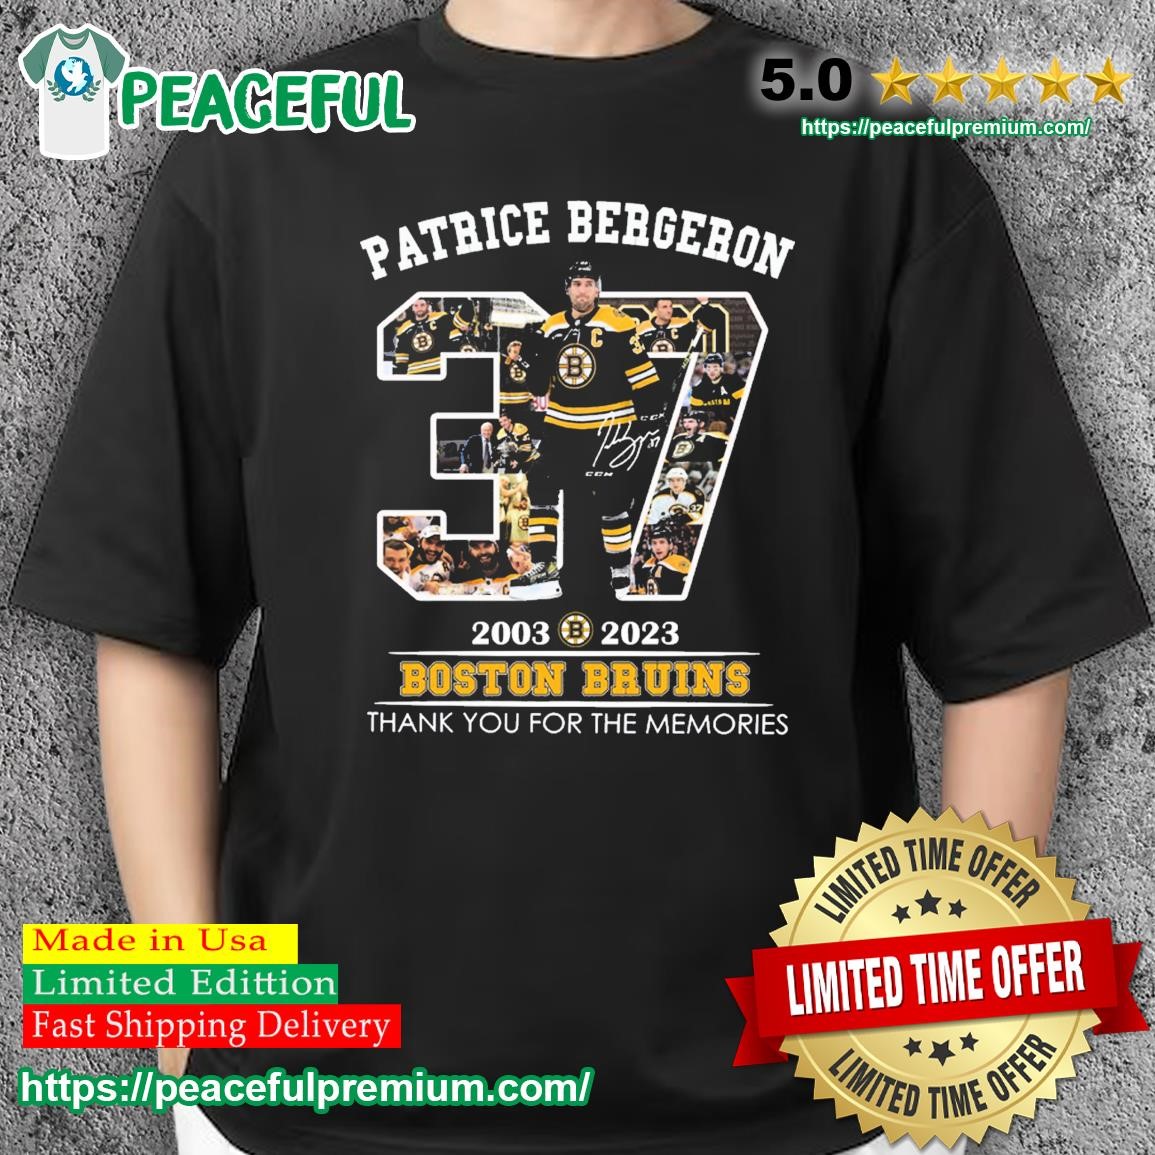 Patrice Bergeron T-Shirts for Sale